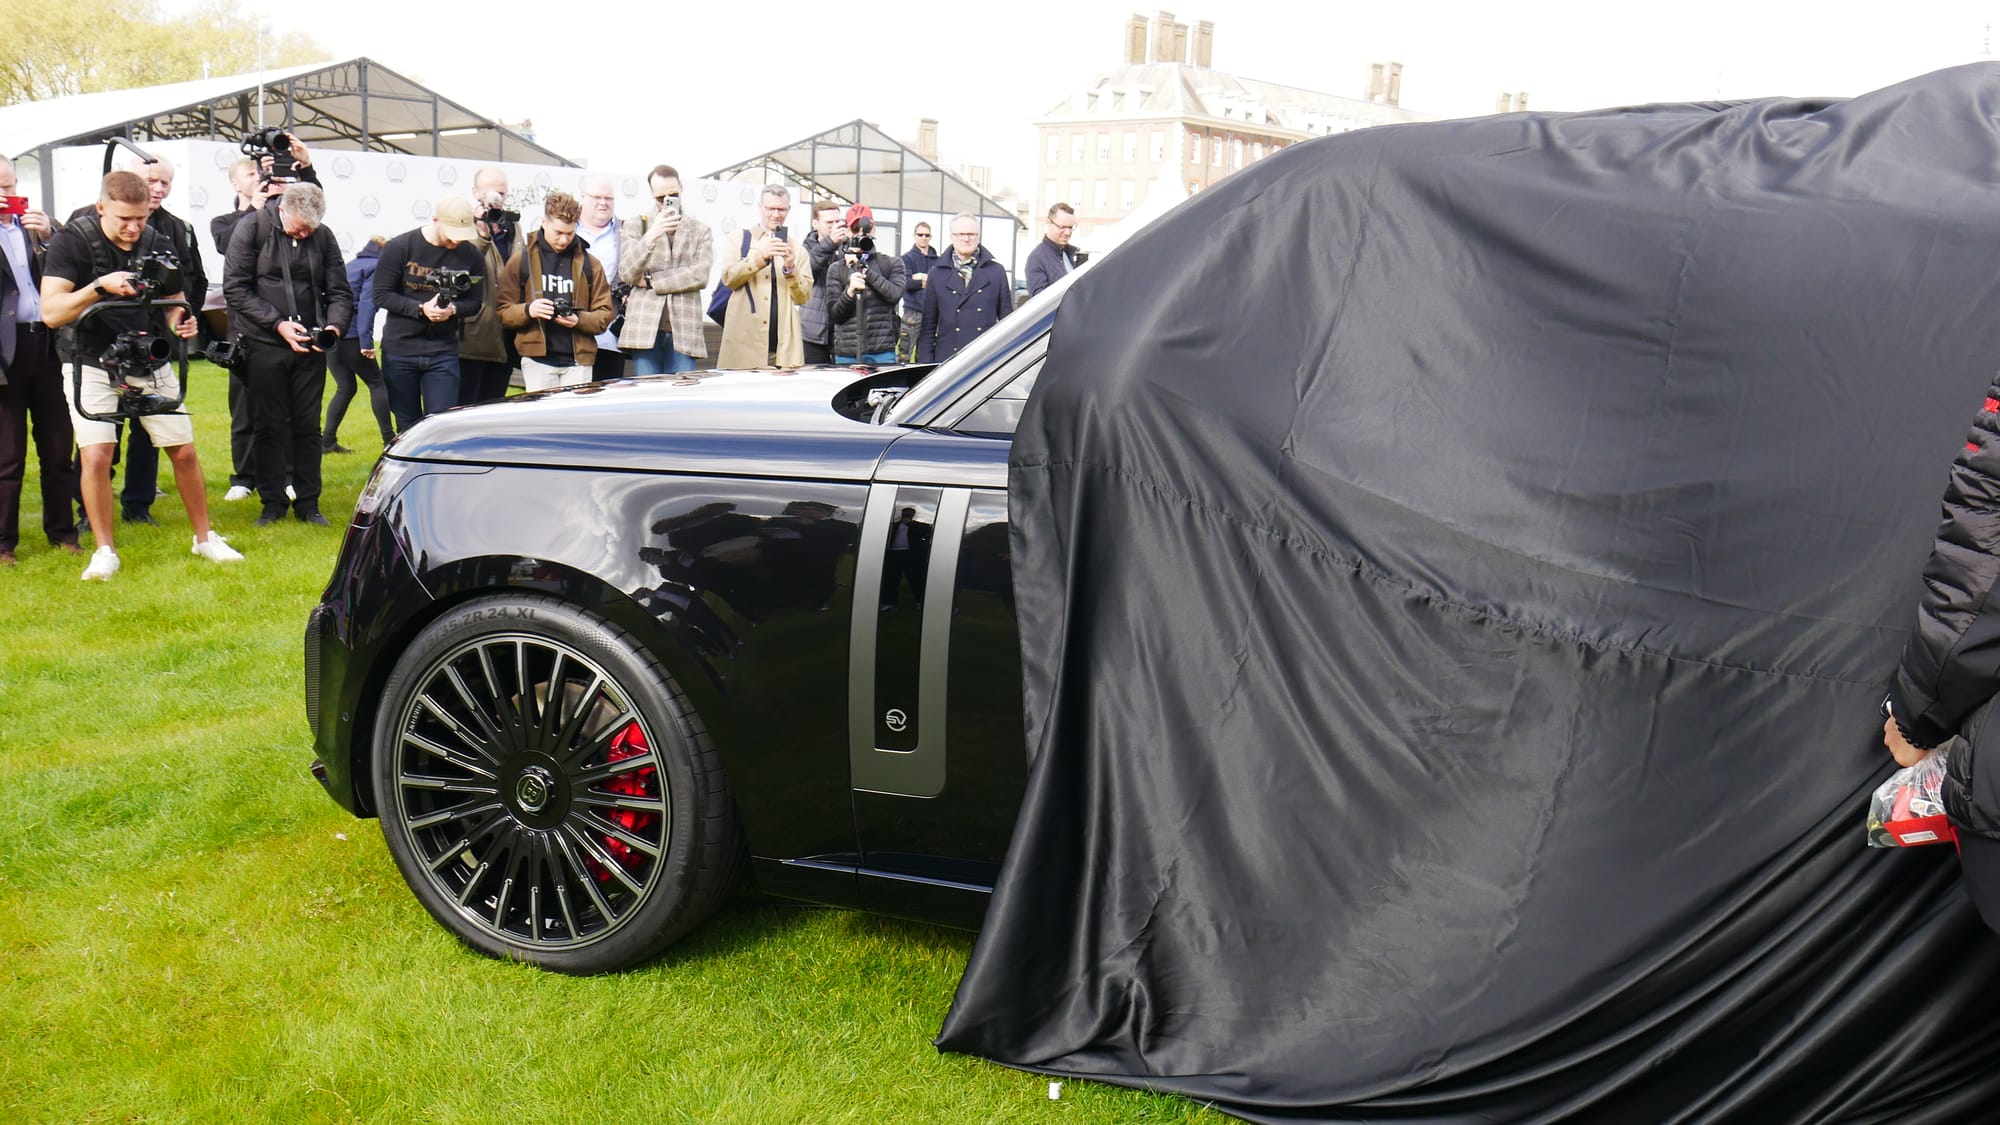 "The Ultimate Luxury Car Showcase: Highlights from the Third Salon Privé London Event"